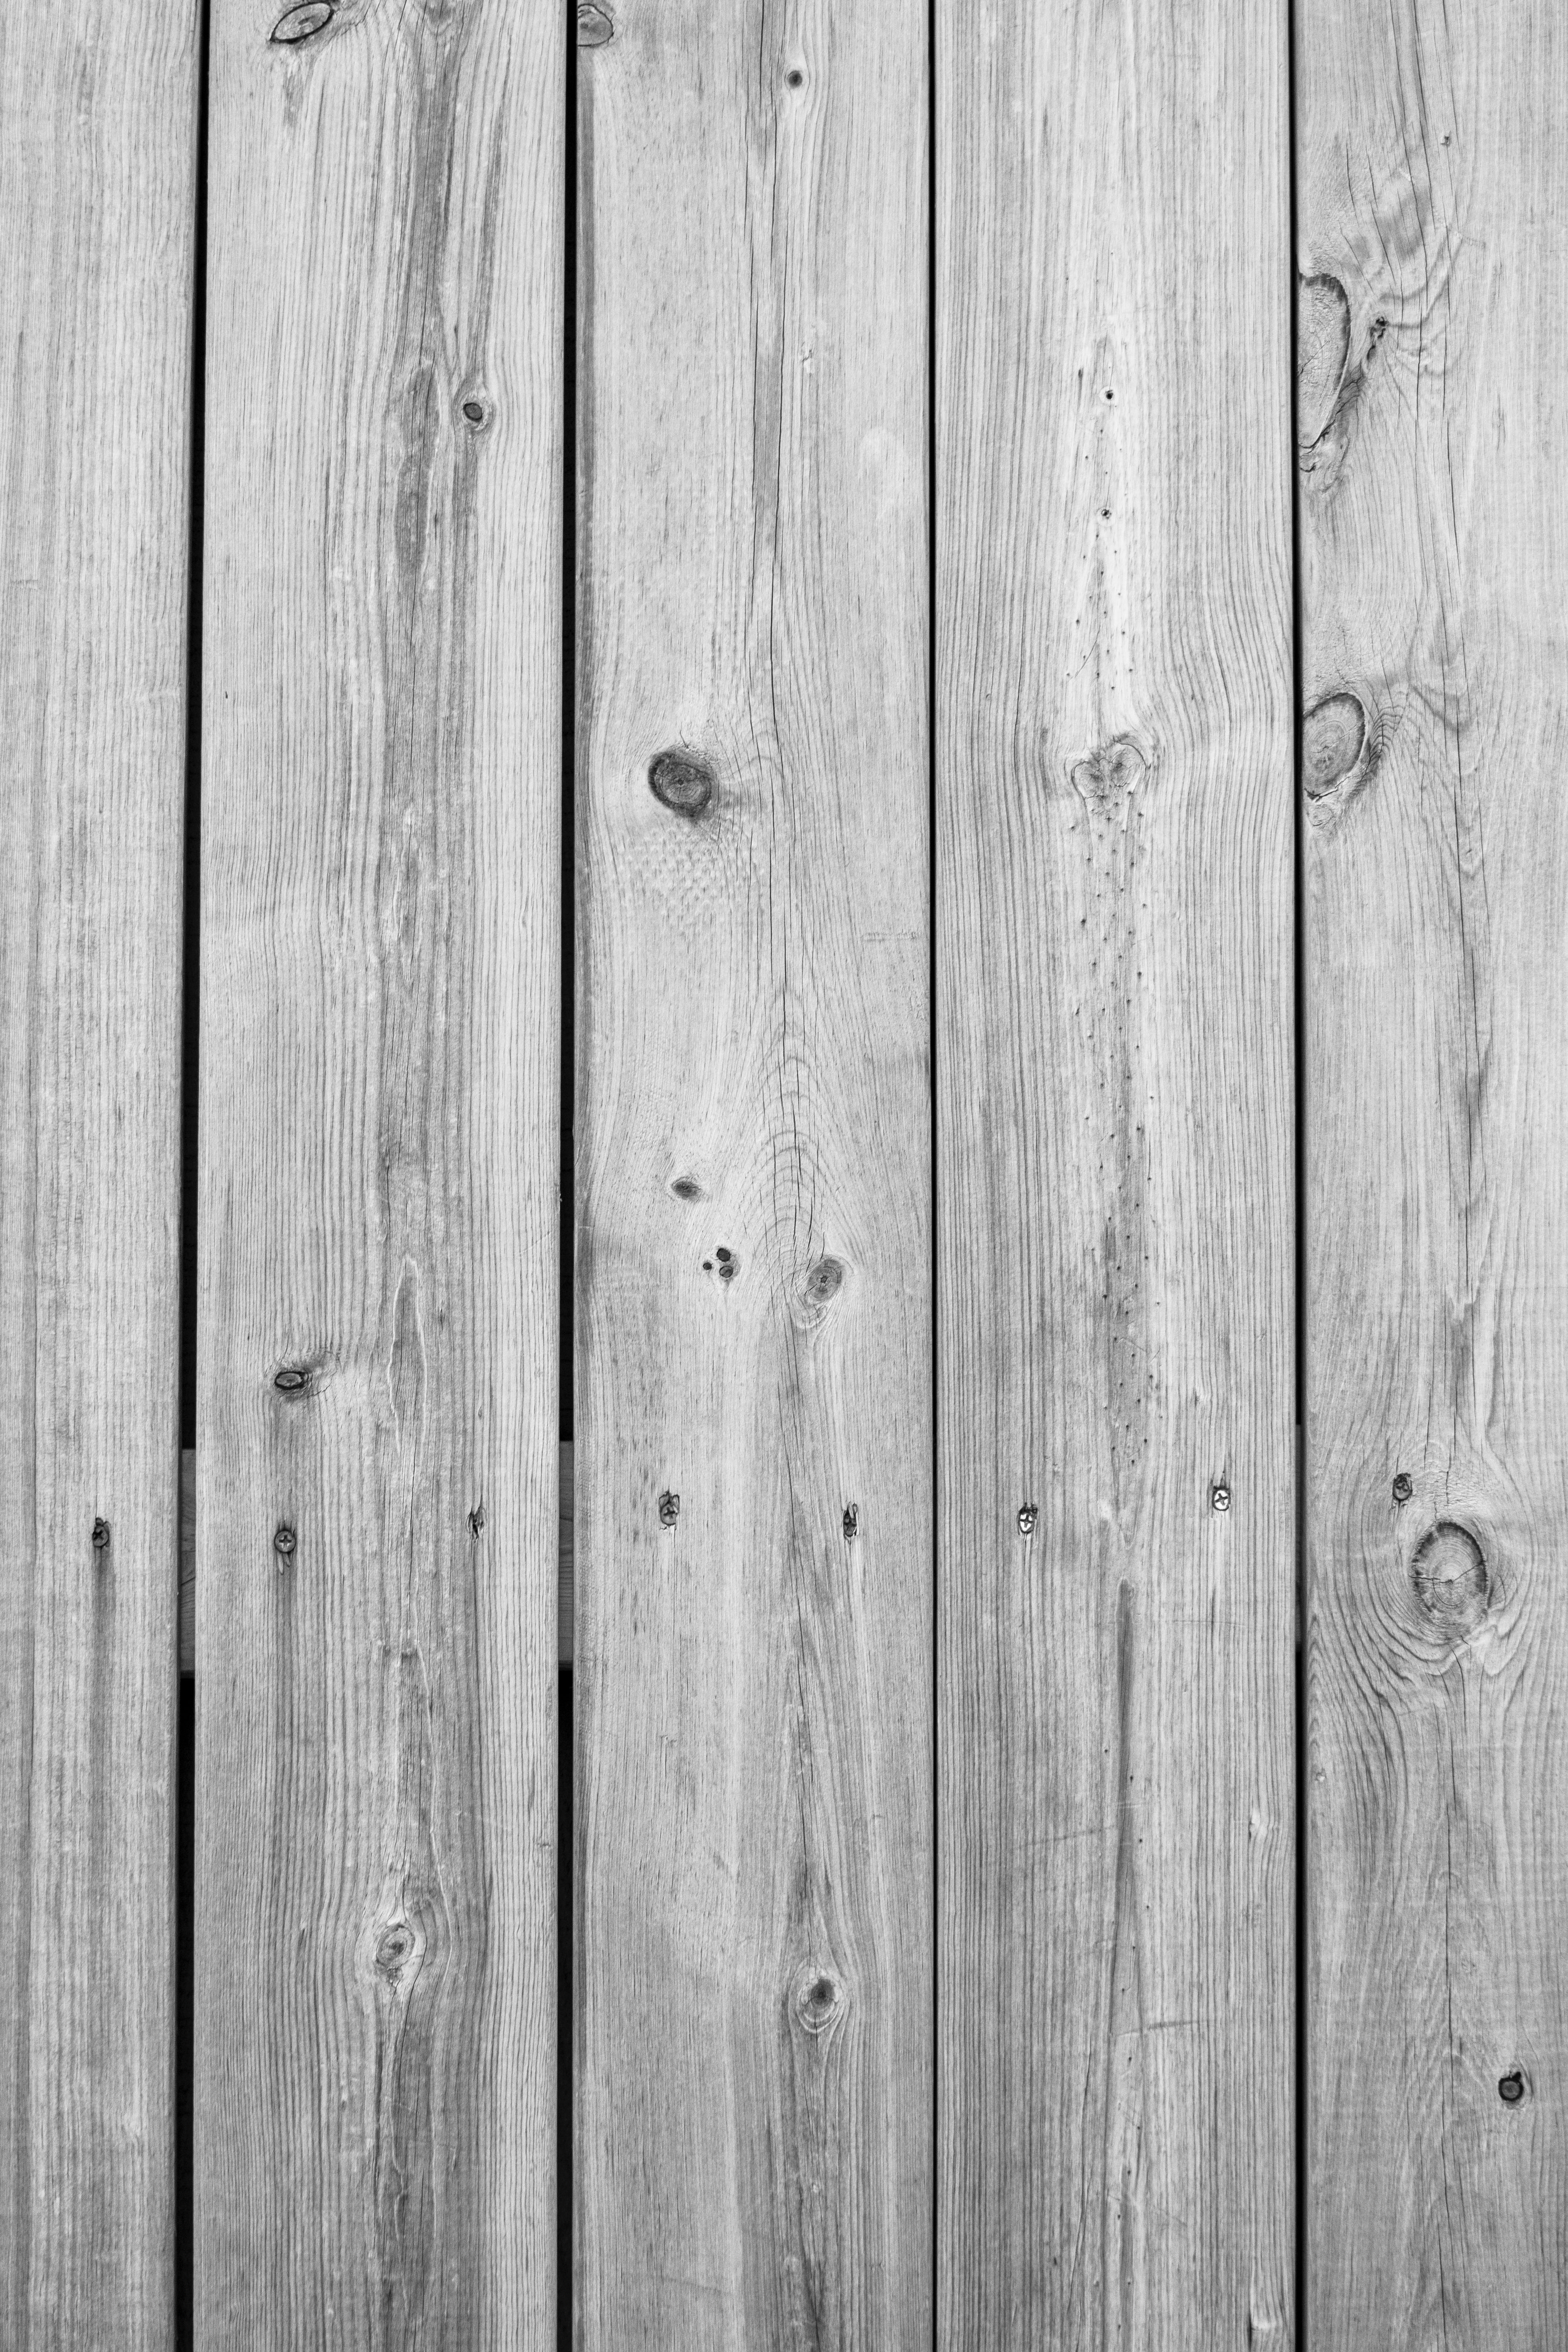 planks, wooden, wood, texture, textures, fence, bw, chb, board